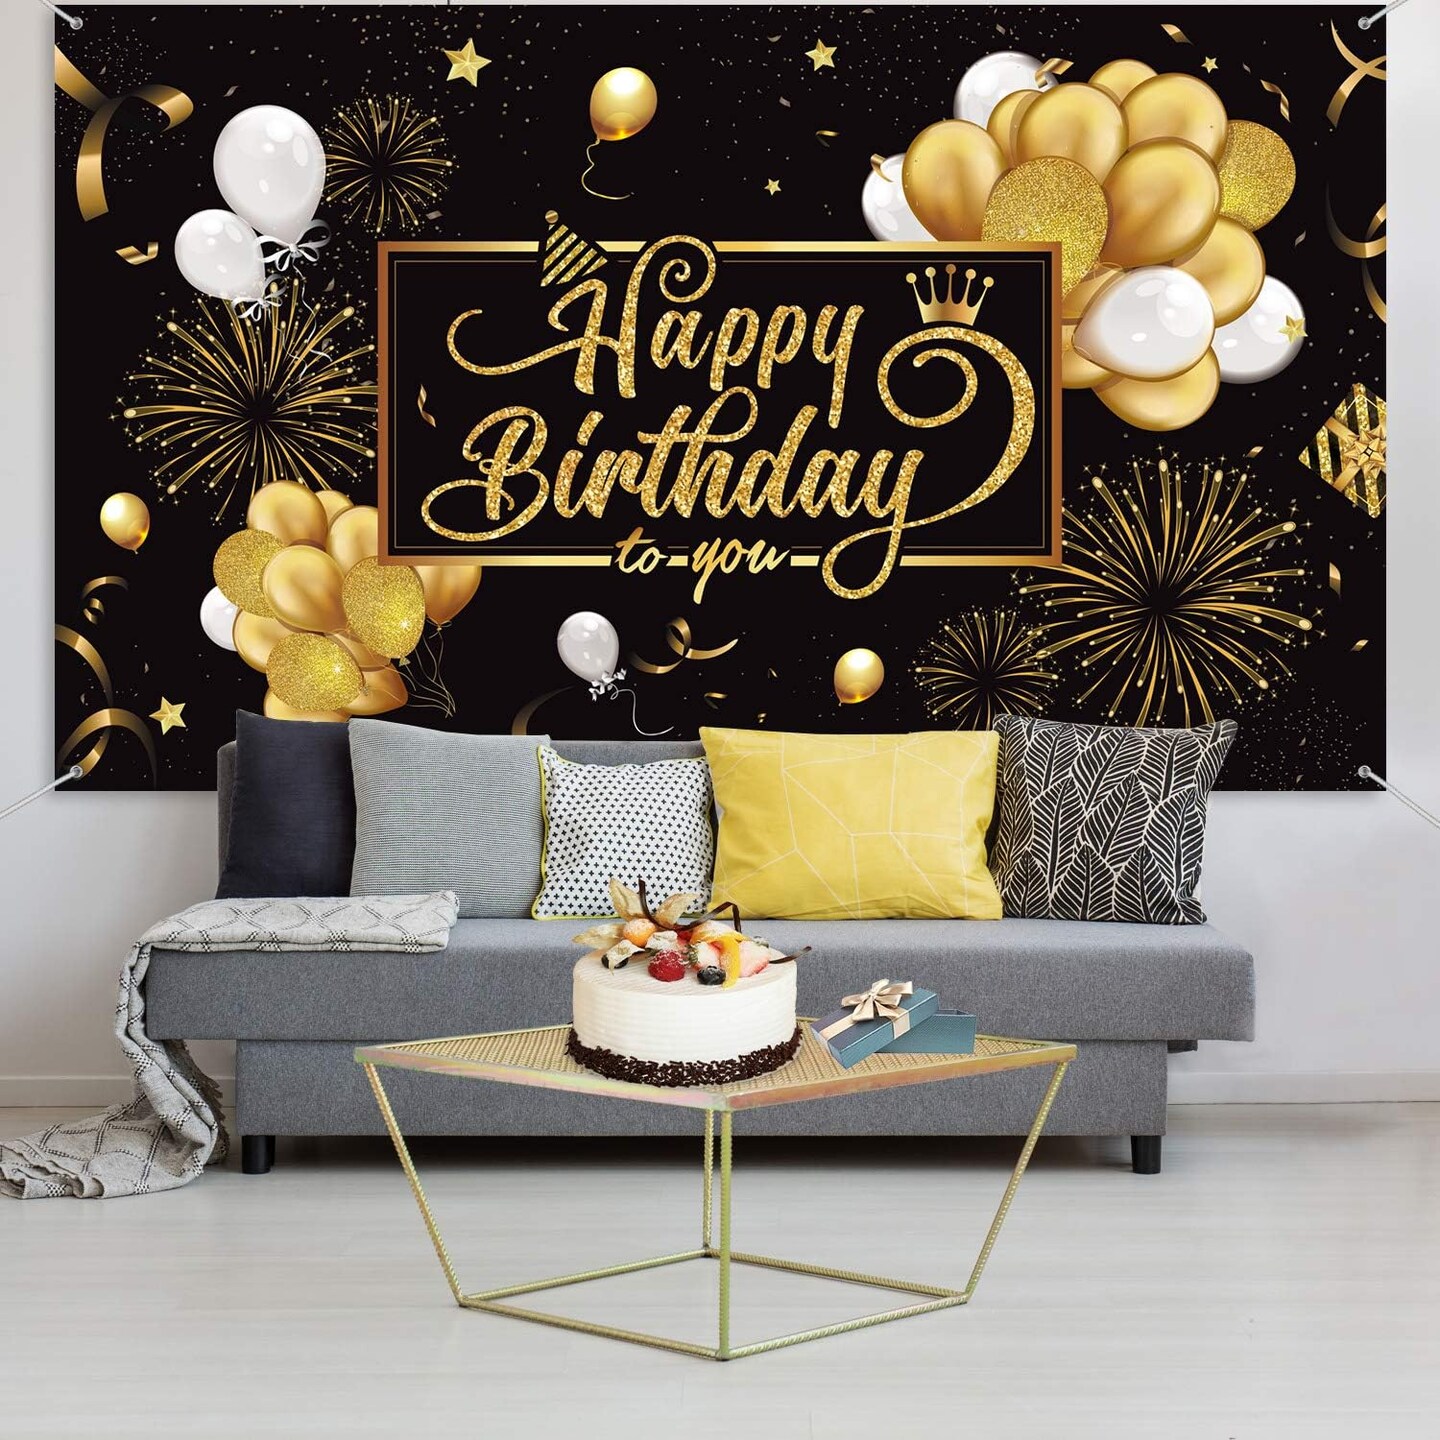 Happy Birthday Backdrop Banner Sign Poster Large Fabric Glitter Balloon Fireworks Sign Birthday Photo Backdrop Background for Birthday Party Decoration Supplies, 72.8 x 43.3in (Black and Gold)